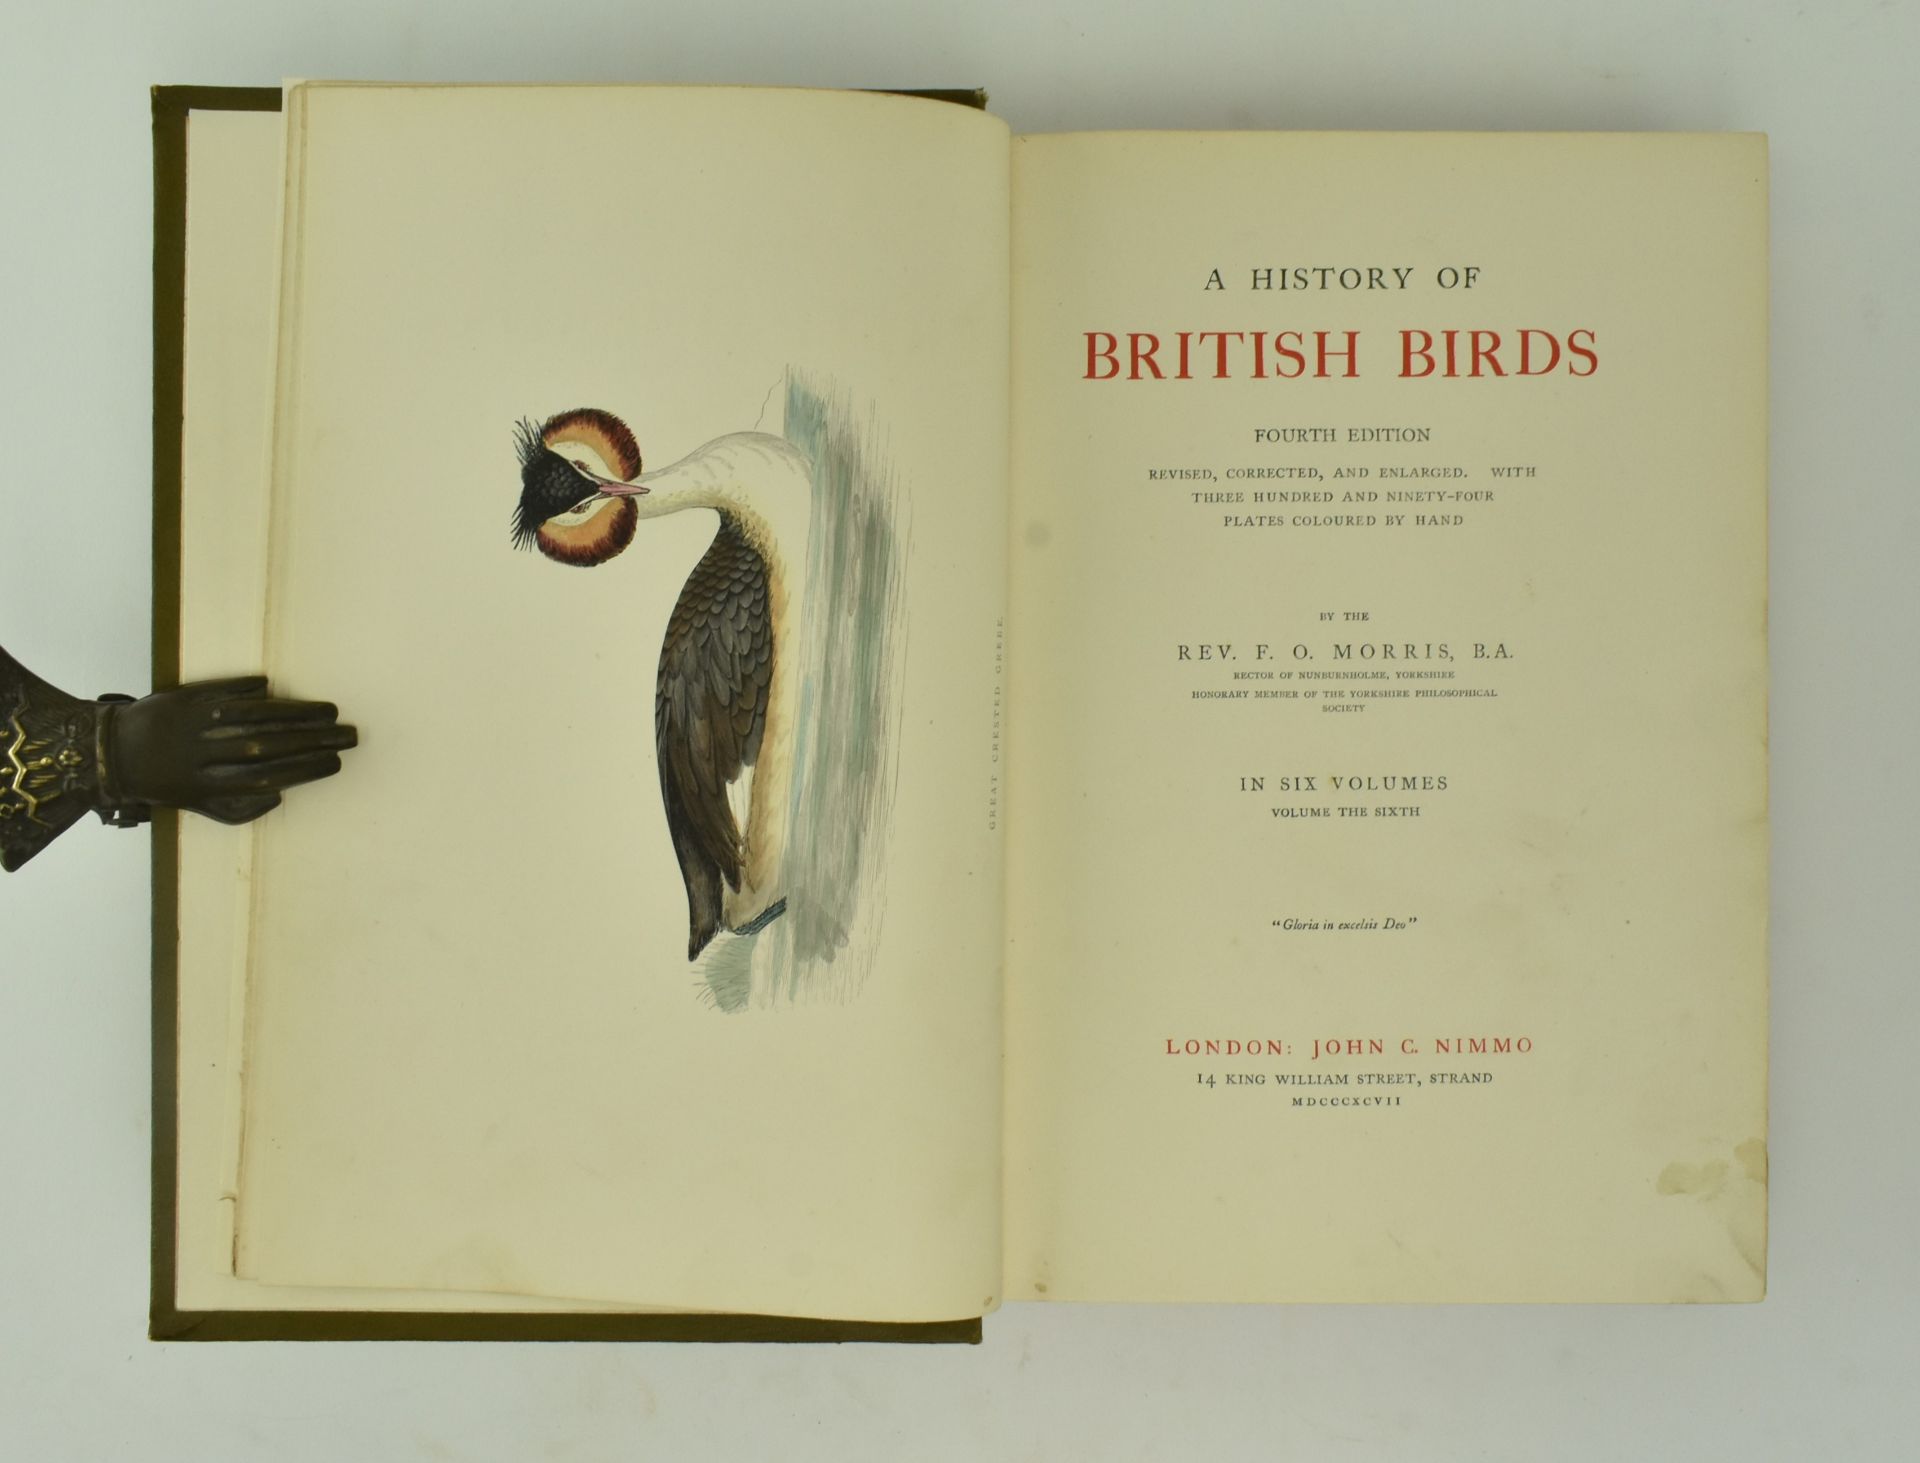 MORRIS, F. O. A HISTORY OF BRITISH BIRDS, 4TH ED IN SIX VOLUMES - Image 7 of 8